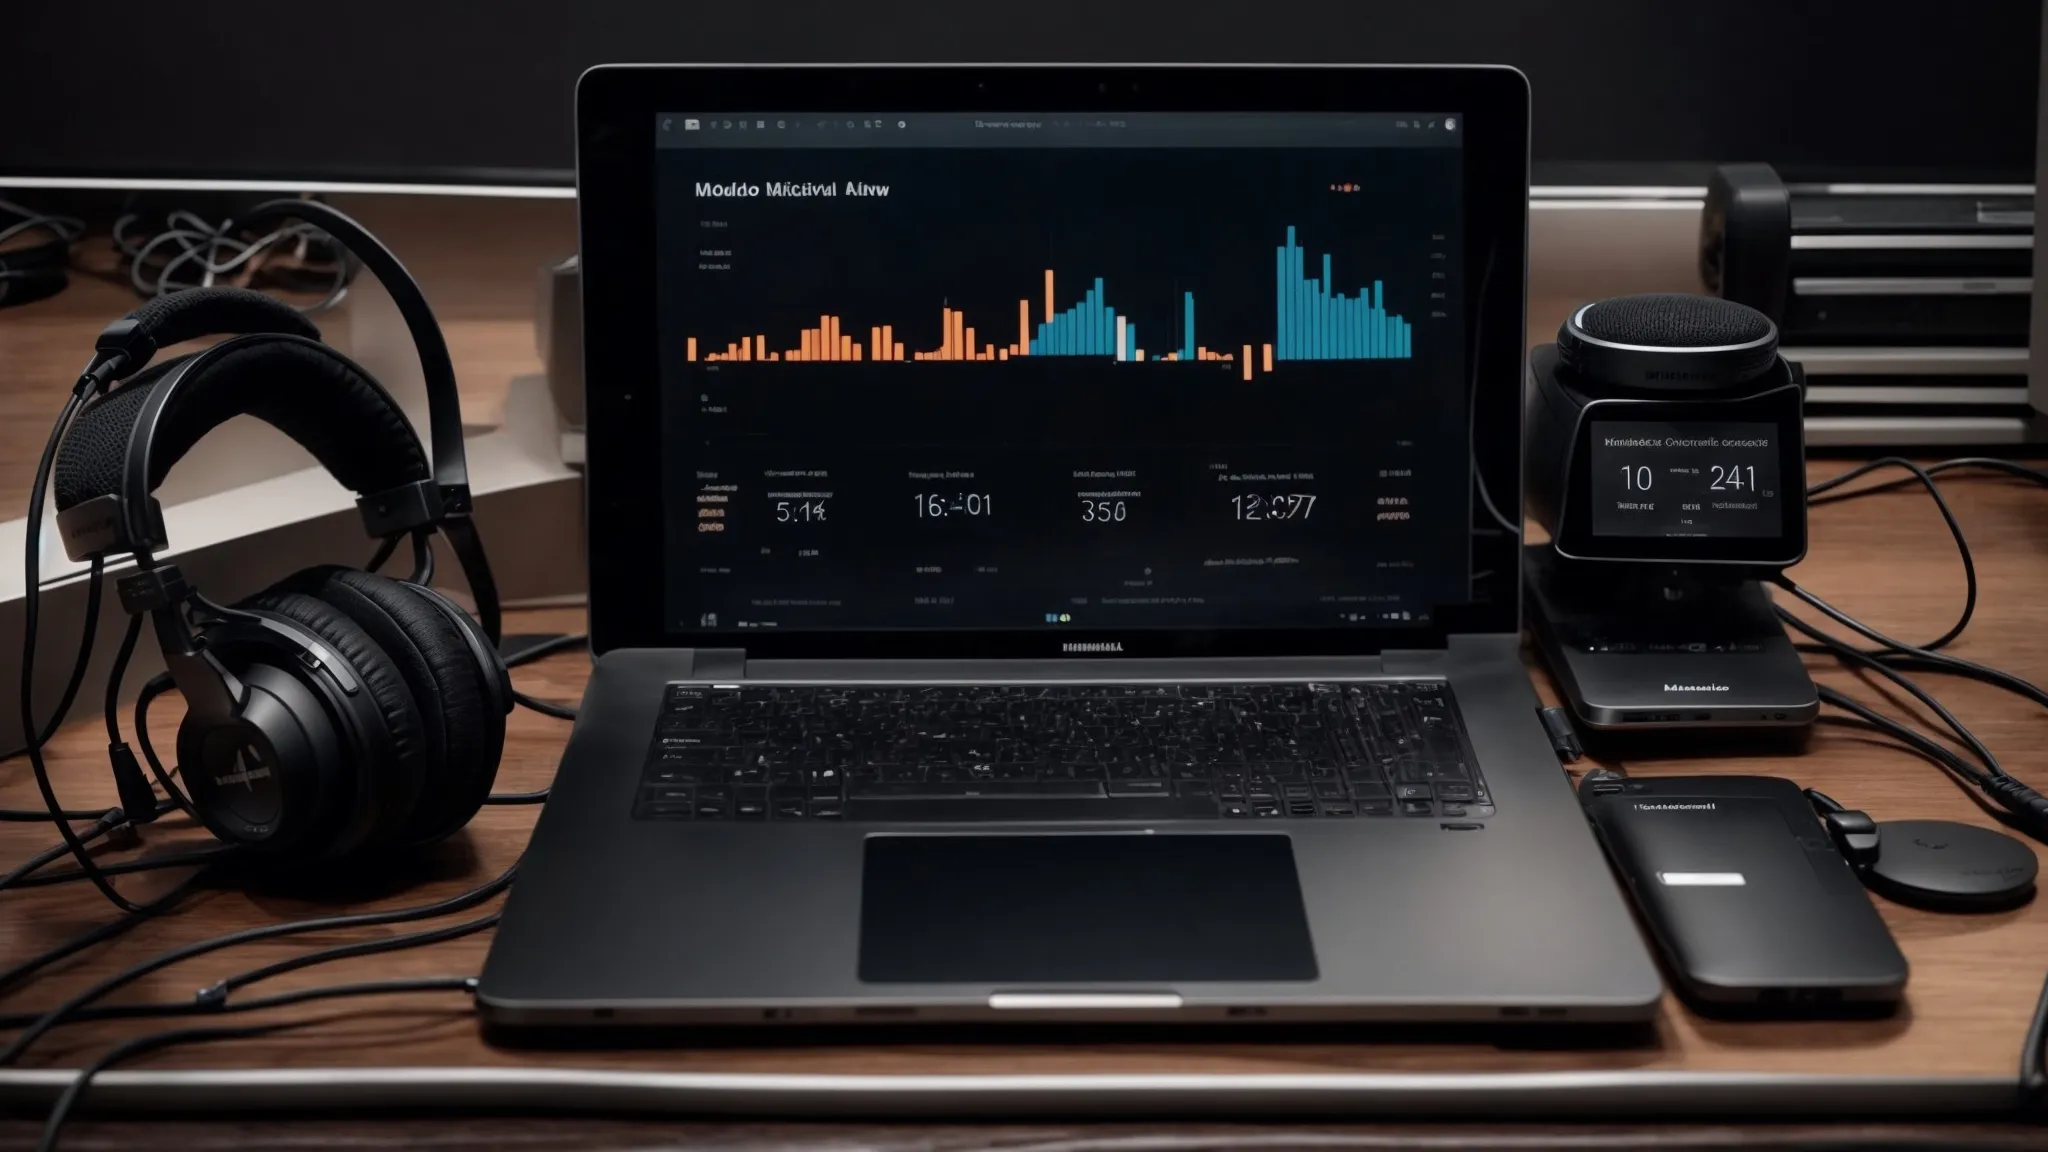 a microphone surrounded by headphones and a laptop displaying an analytics dashboard on its screen.